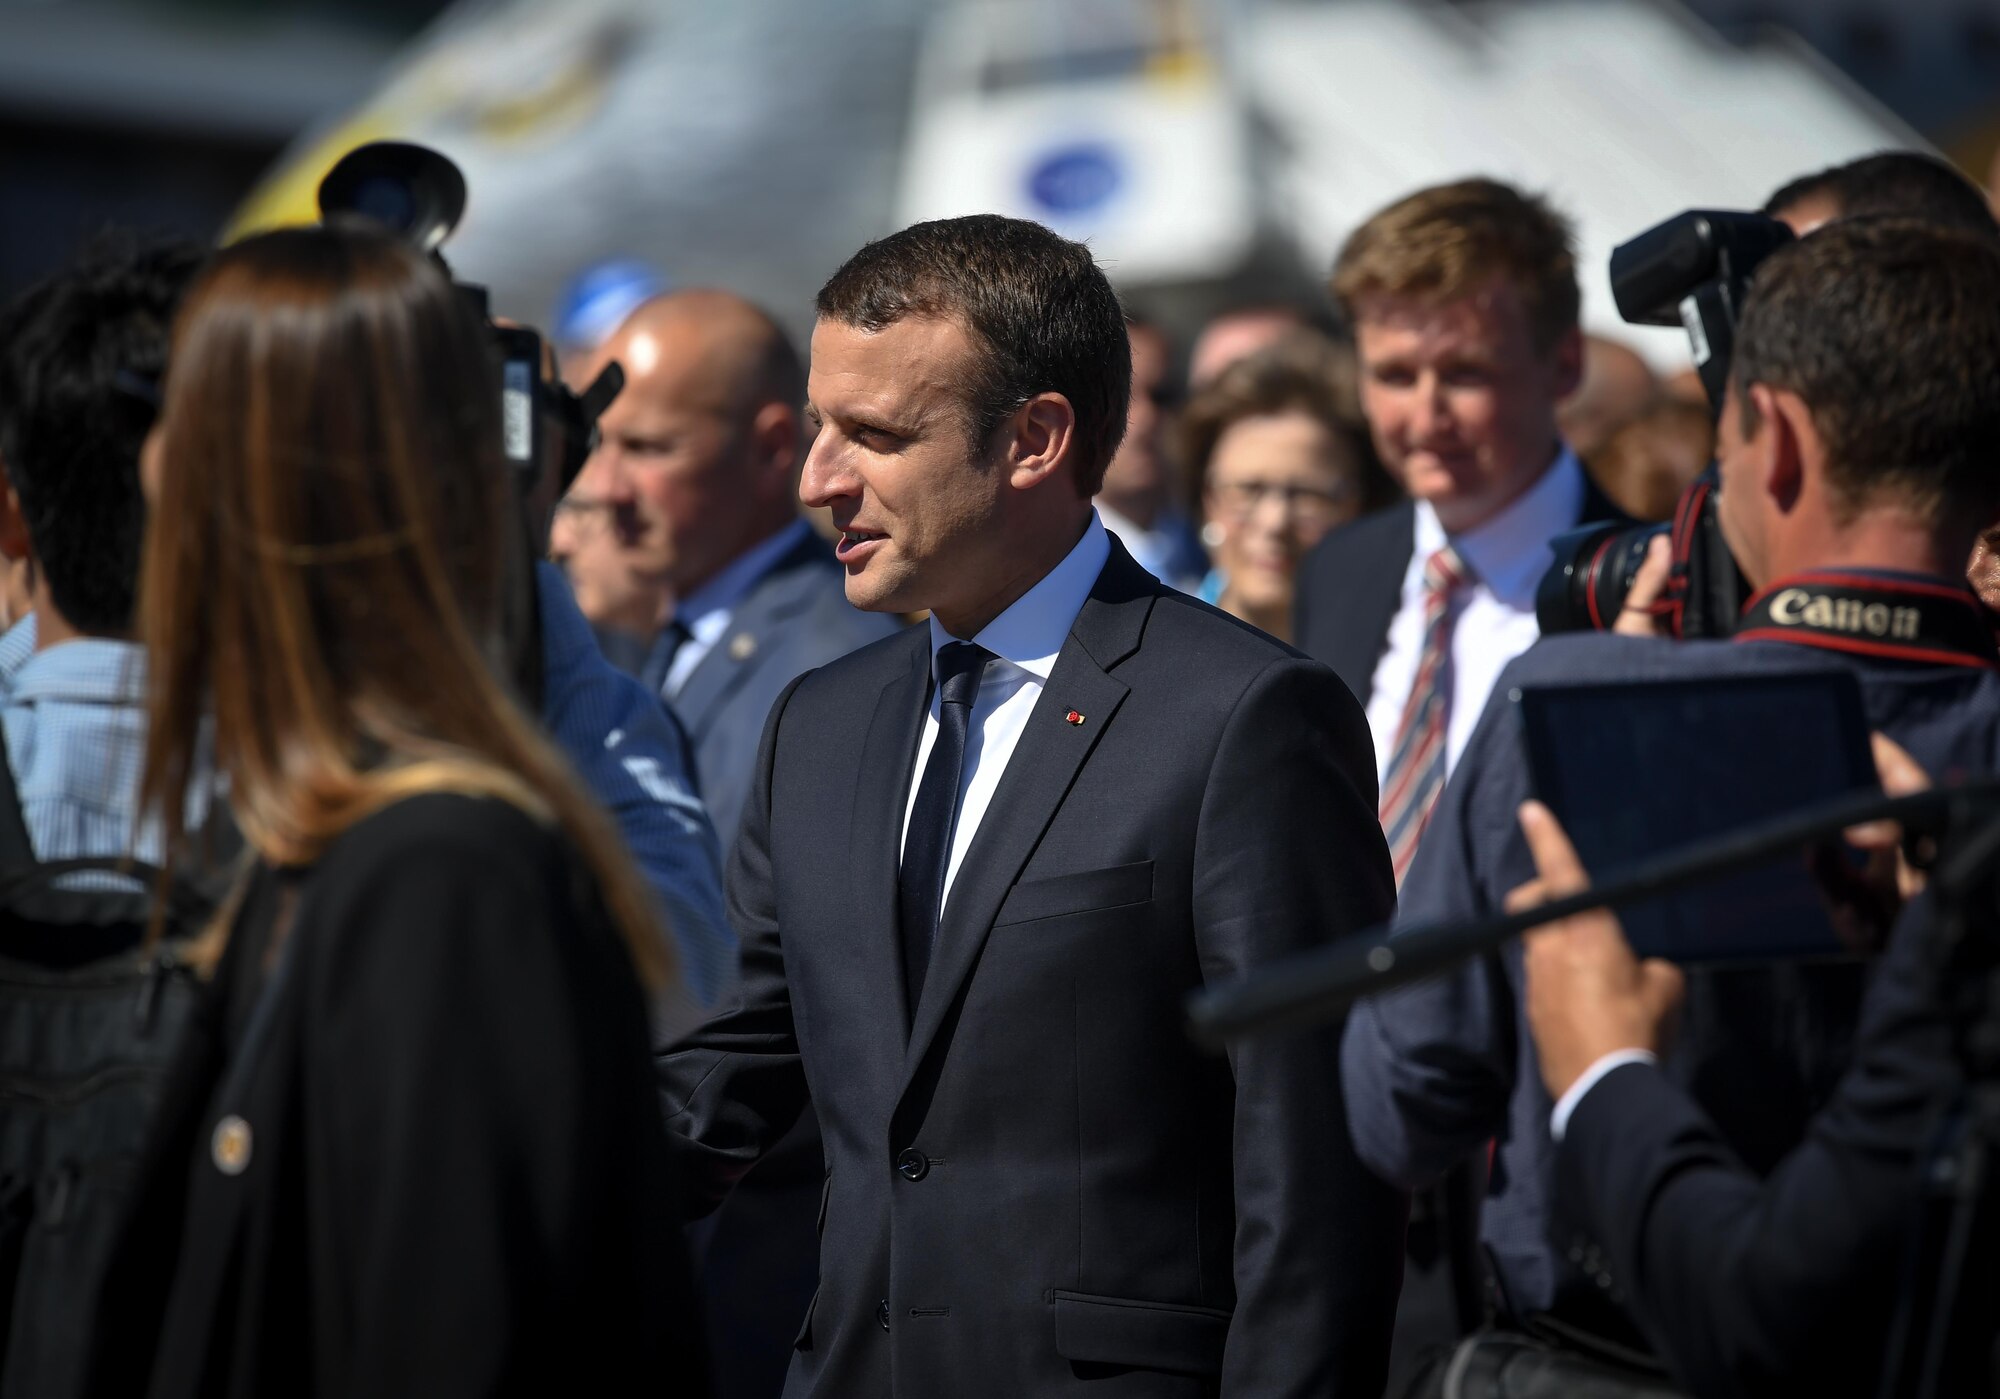 French President Emmanuel Macron visits the U.S. military corral at the Paris Air Show, June 19, 2017 at Le Bourget, France. Held every year, the Paris Air Show represents a unique opportunity for the United States to showcase its leadership in aerospace technologies. Direct participation in the air show supports U.S. government security policy and strategic defense objectives. (U.S. Air Force photo/ Tech. Sgt. Ryan Crane)